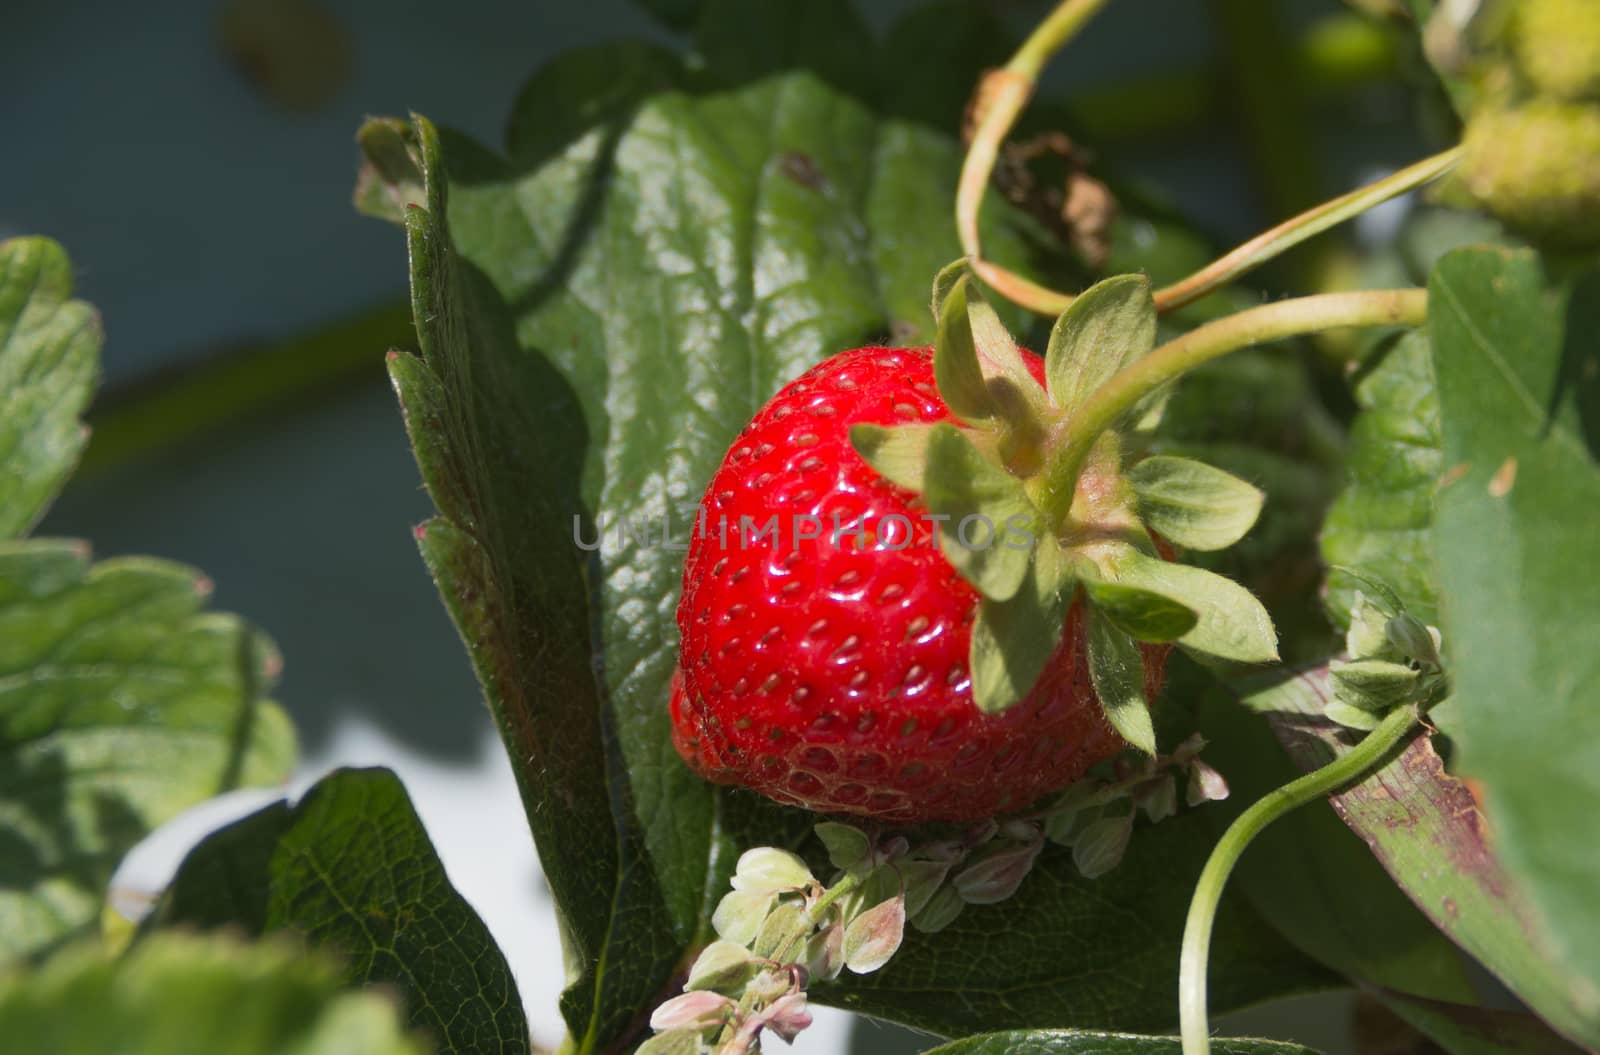 strawberry ripe on a branch by ben44